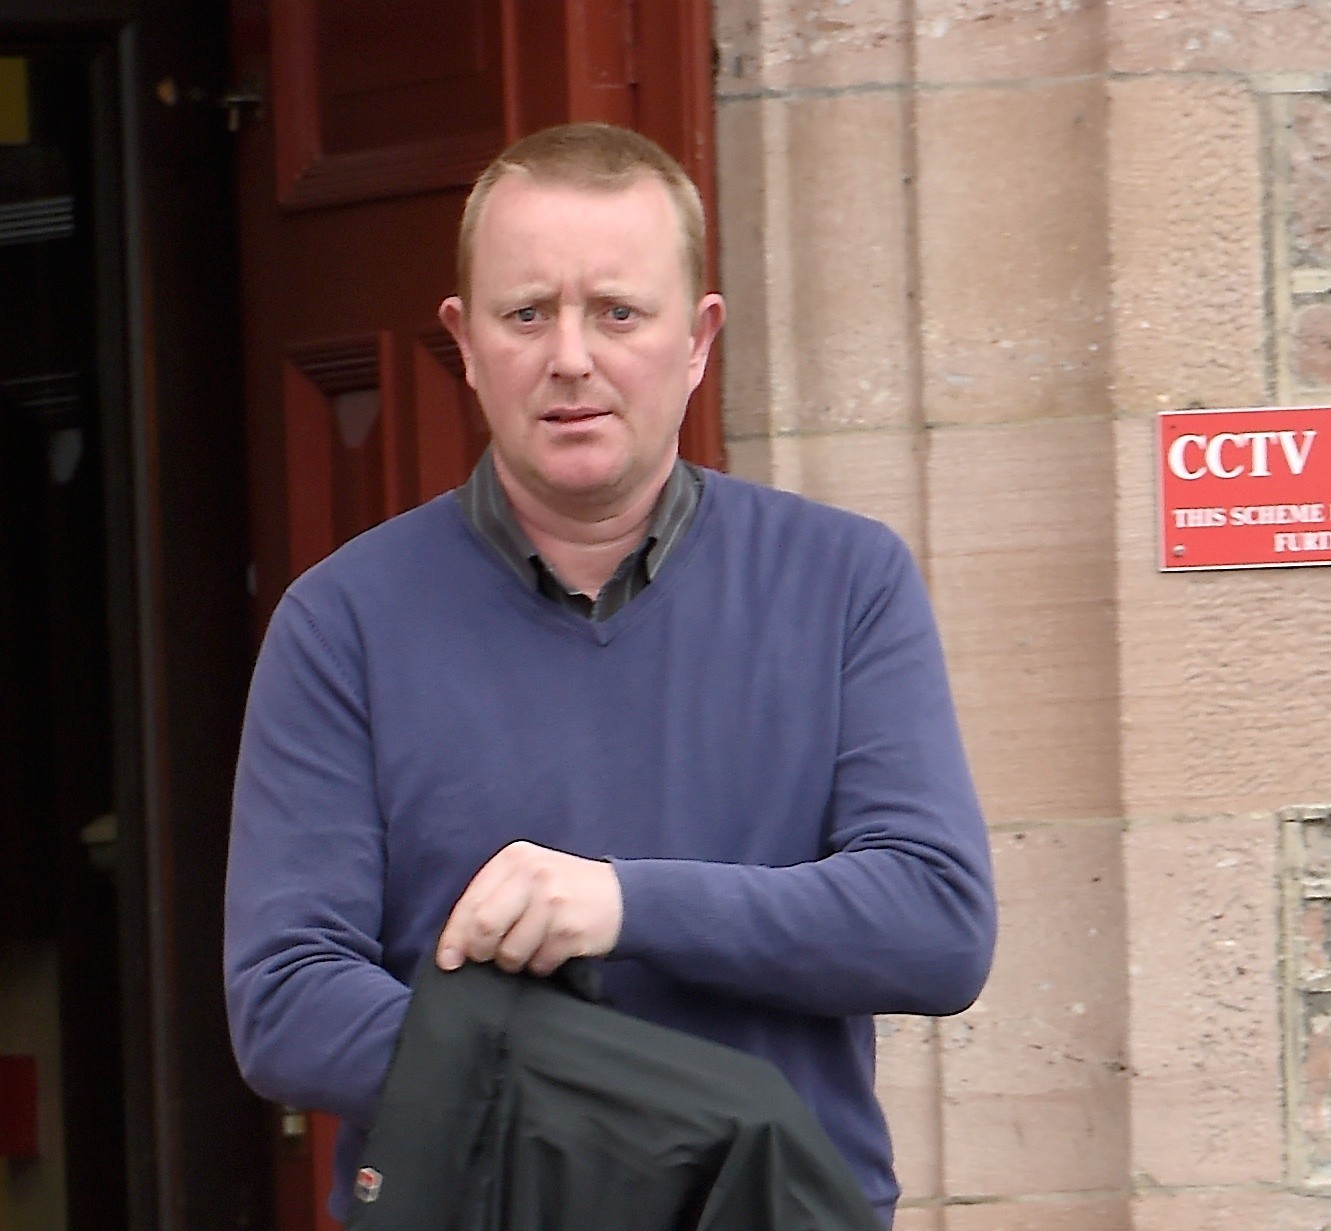 John Duff of Forres leaves Inverness Sheriff Court after appearing on theft charges.